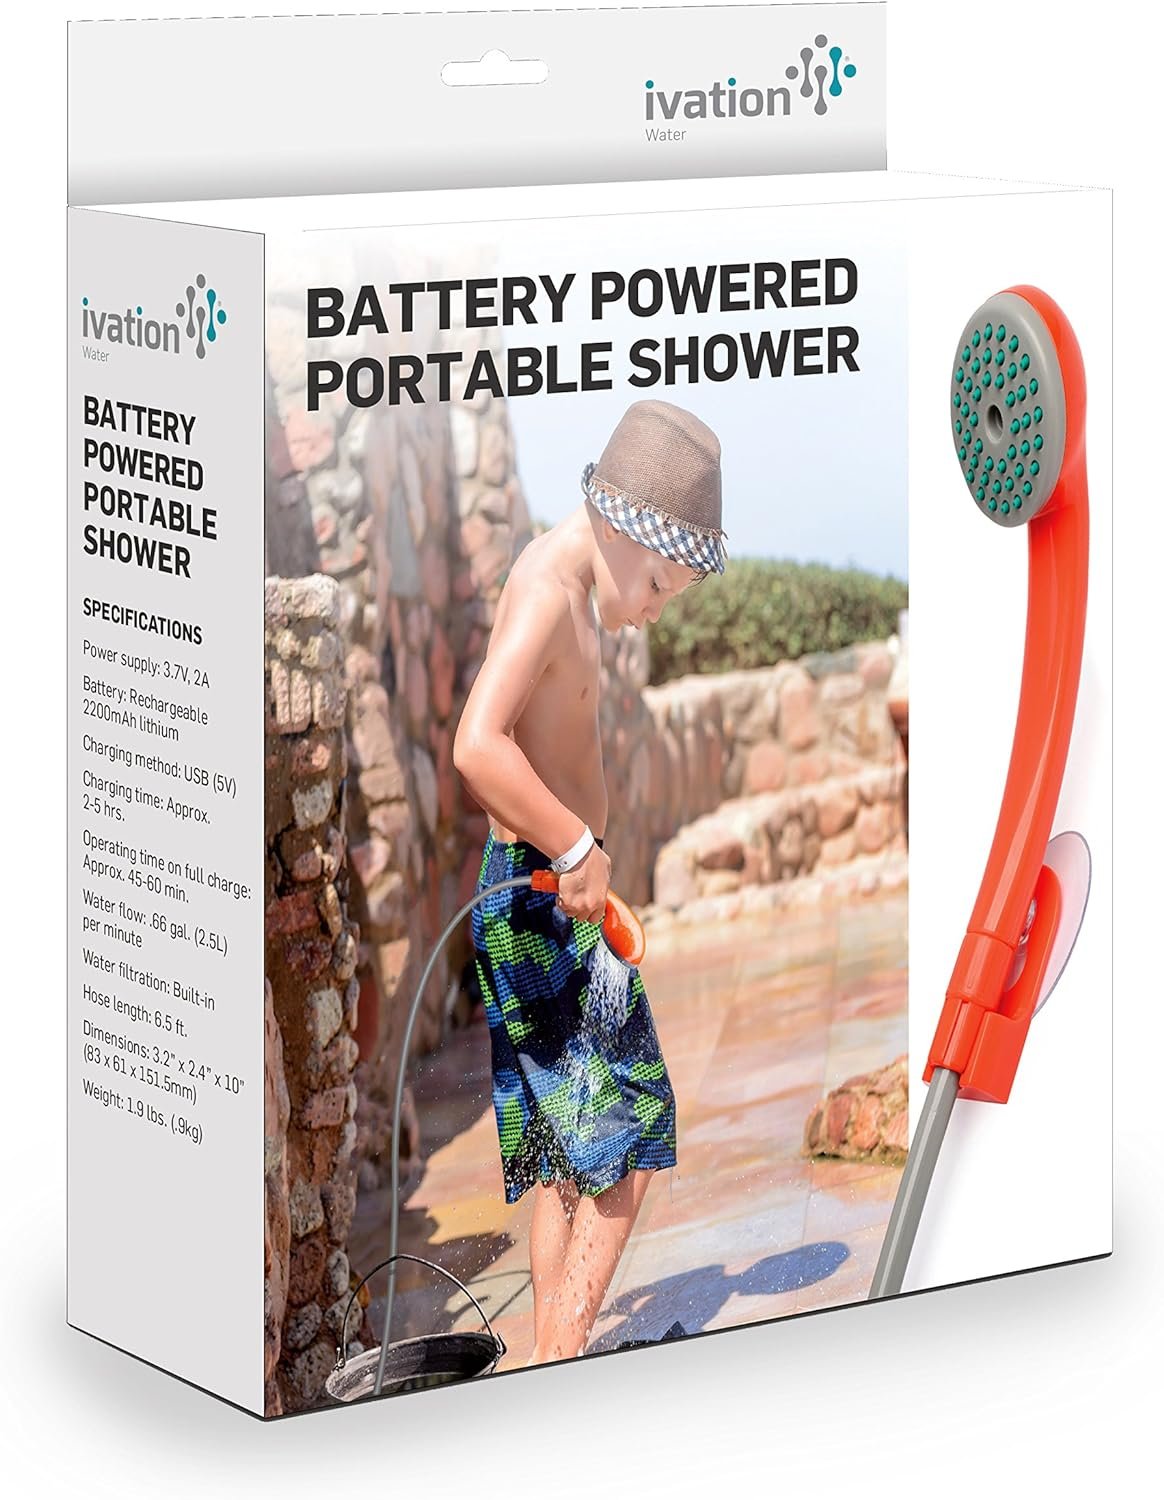 3 Ivation Portable Outdoor Shower, Battery Powered - Compact Handheld Rechargeable Camping Showerhead - Pumps Water from Bucket Into Steady, Gentle Shower Stream